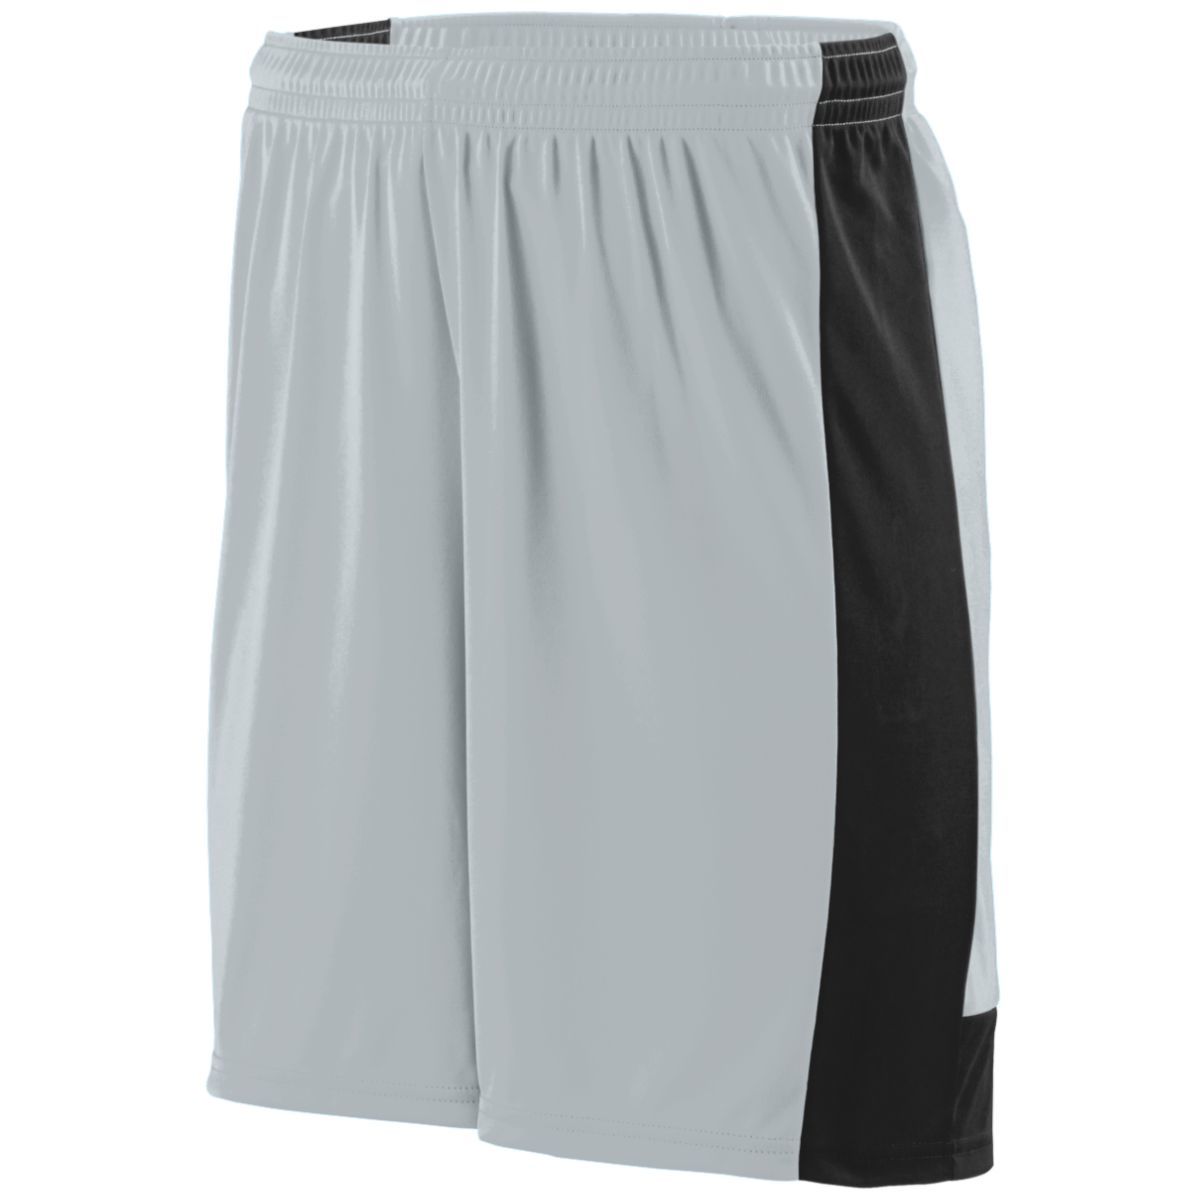 Augusta Sportswear Youth Lightning Shorts in Silver/Black  -Part of the Youth, Youth-Shorts, Augusta-Products, Soccer, All-Sports-1 product lines at KanaleyCreations.com